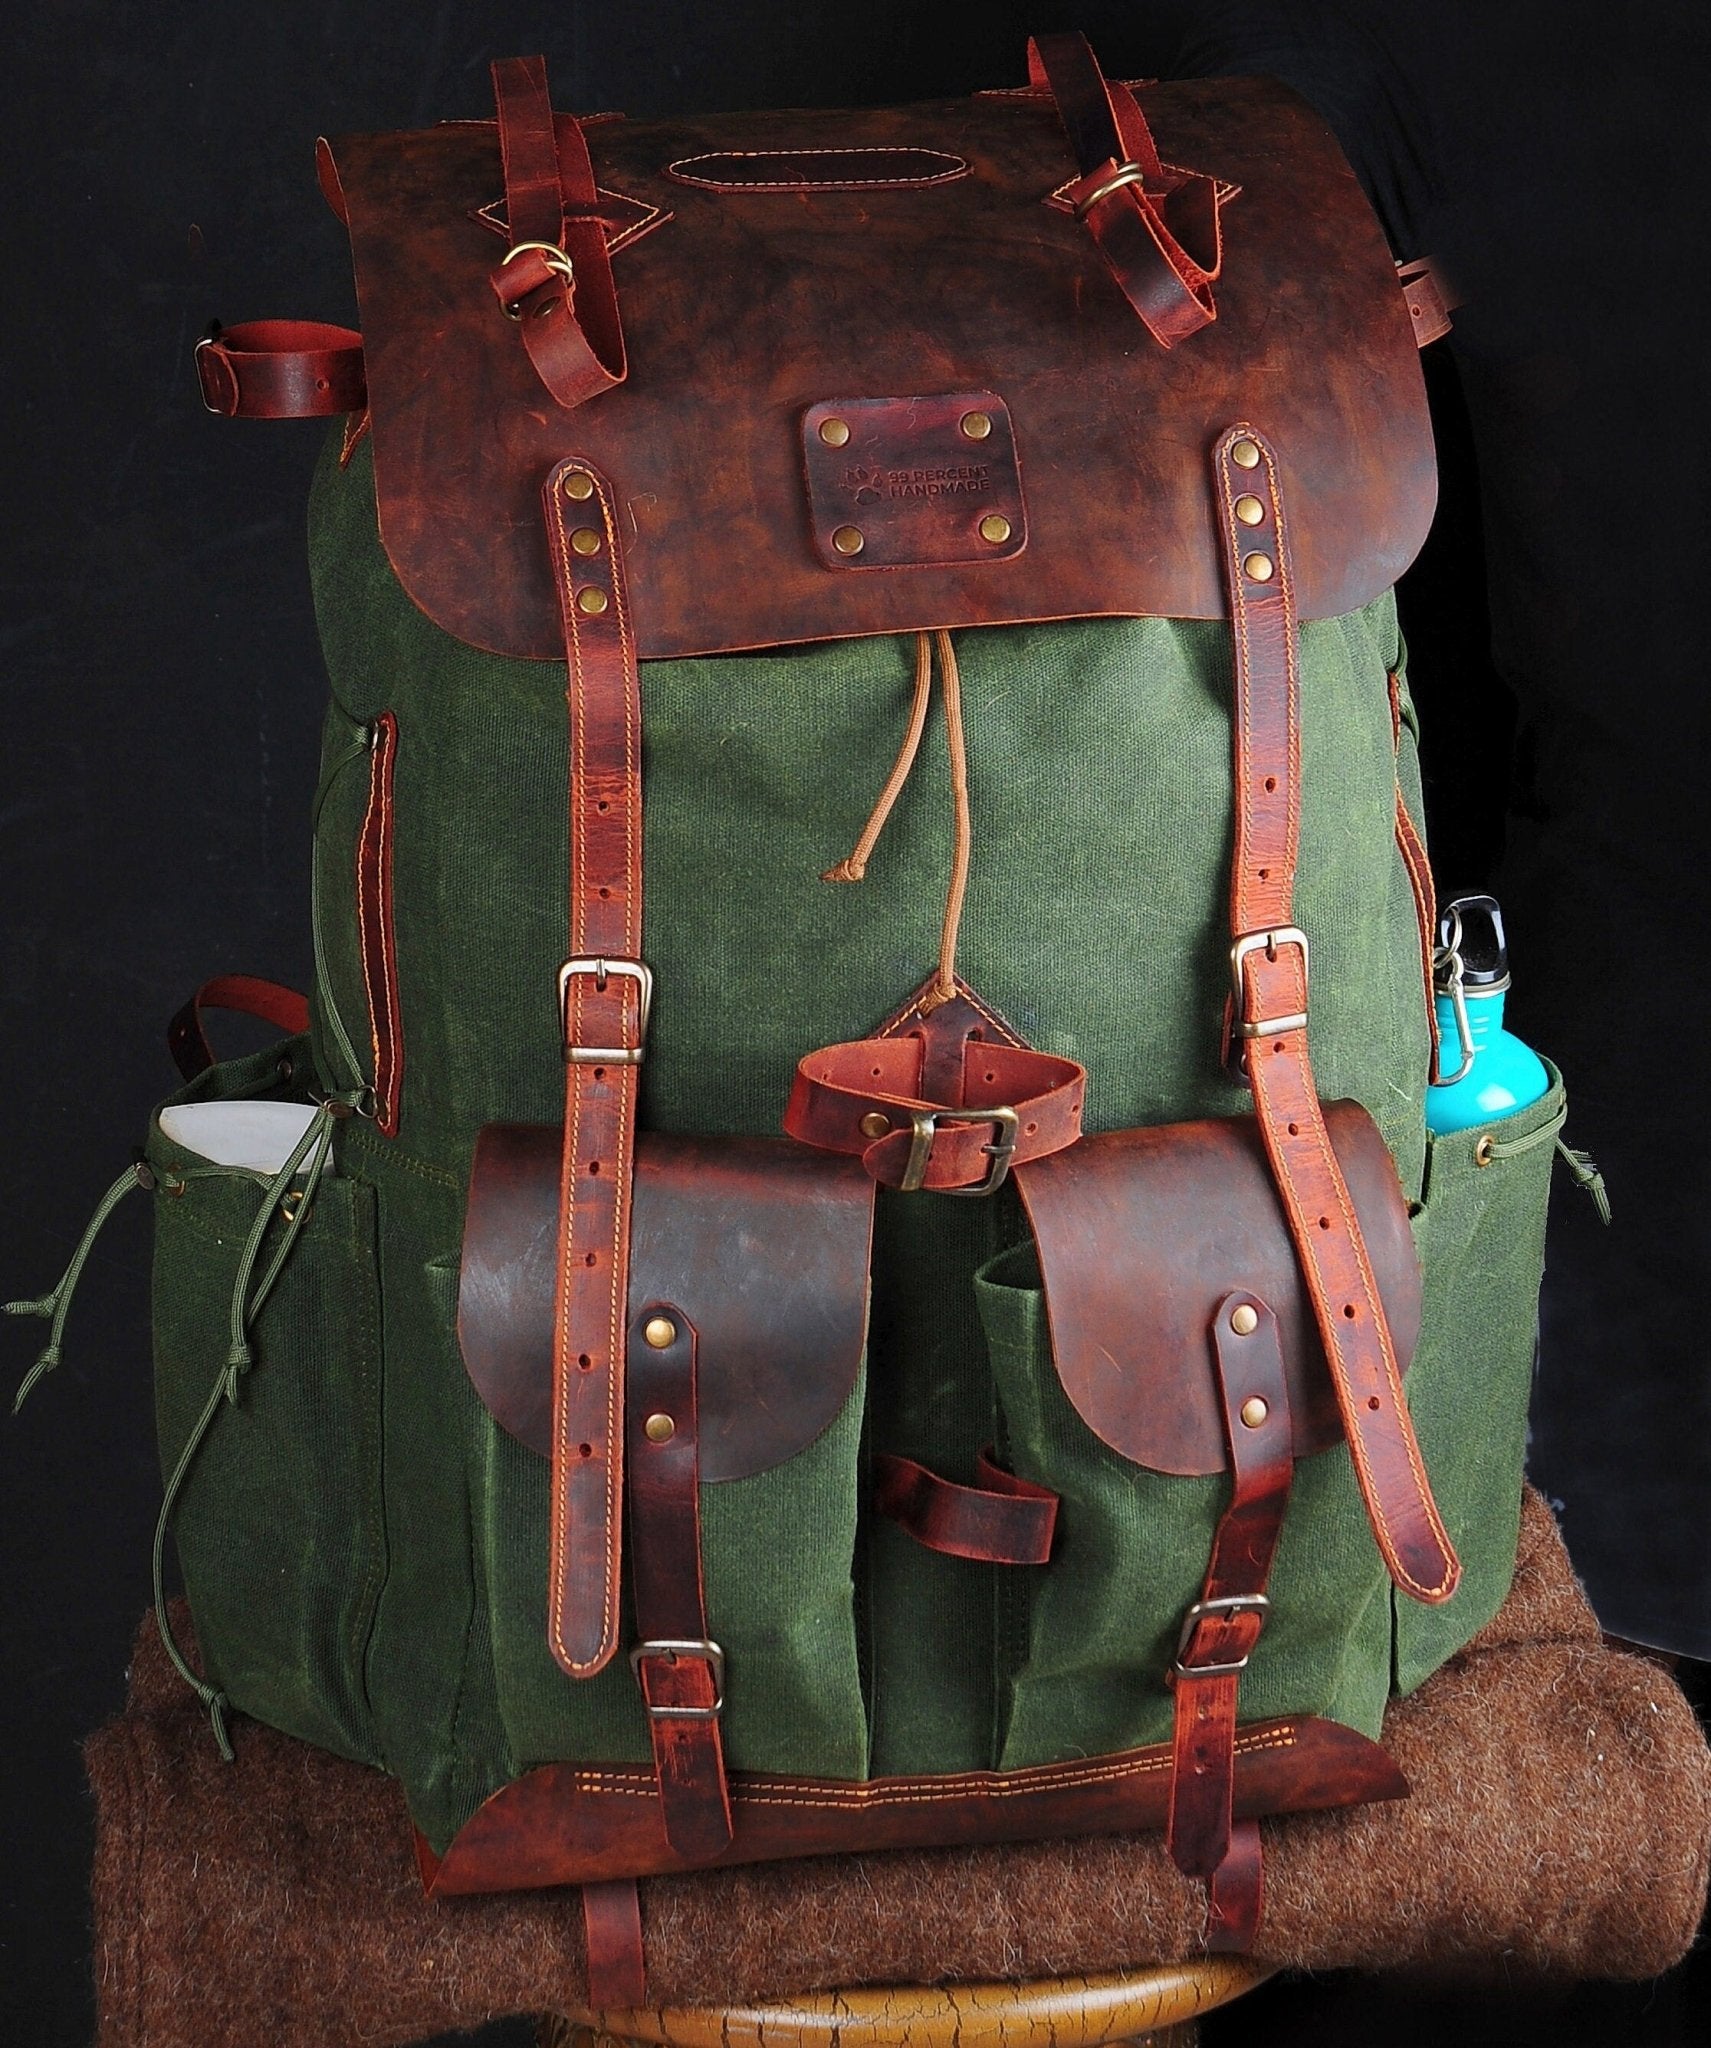 50L | 6 Pieces Left | Green, Brown, Dhaki Colours | Handmade Leather, Waxed Canvas Backpack for Travel, Camping, Bushcraft | Personalization bushcraft - camping - hiking backpack 99percenthandmade 30 Liters Green C. - Brown L. 